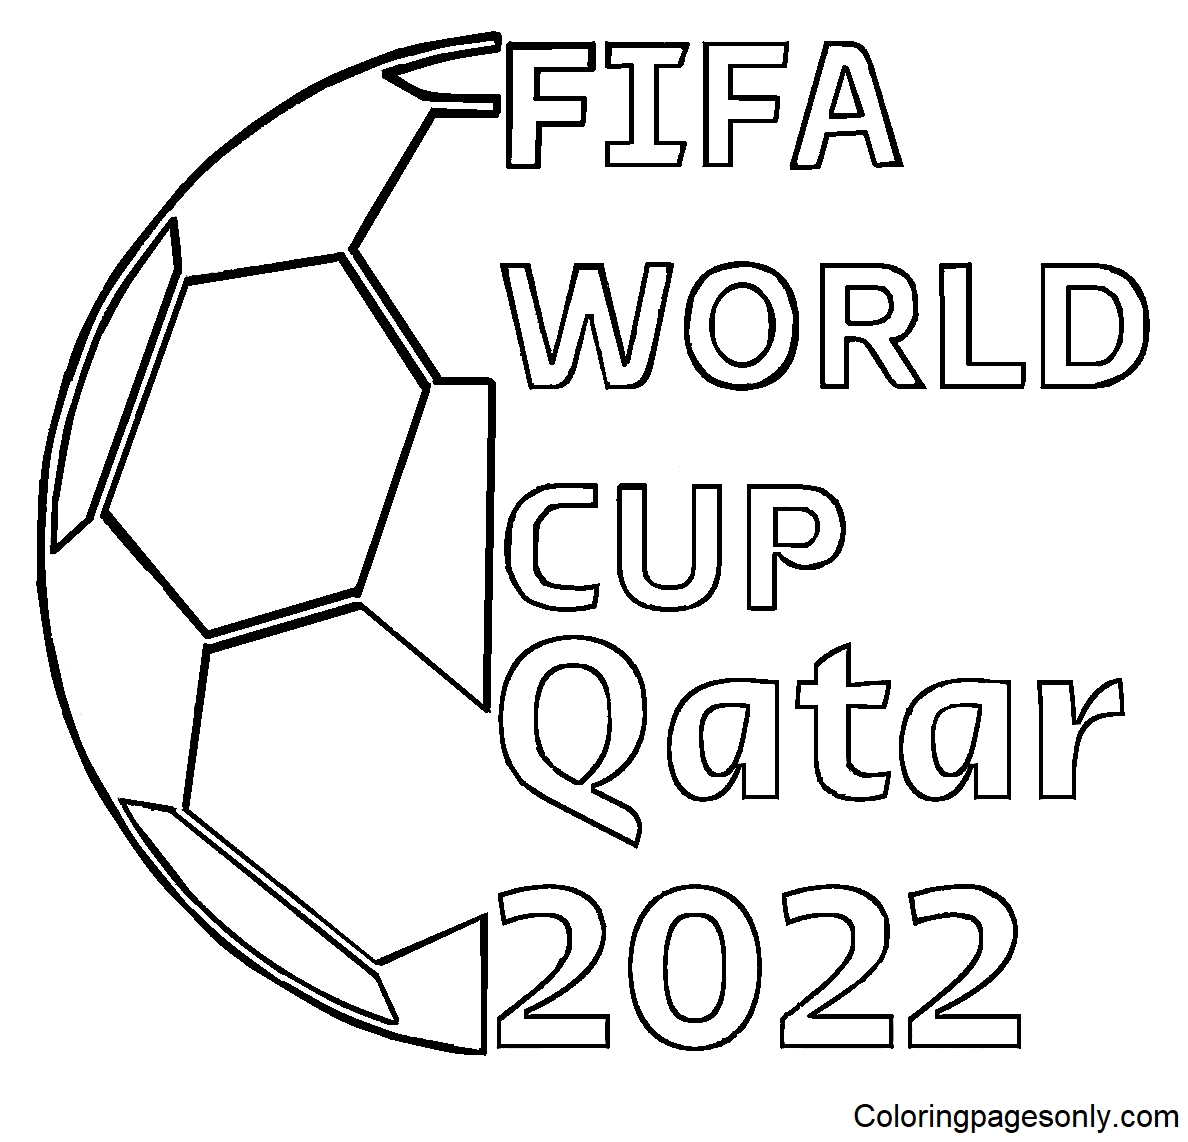 FIFA World Cup 2022 Coloring Pages - Coloring Pages For Kids And Adults